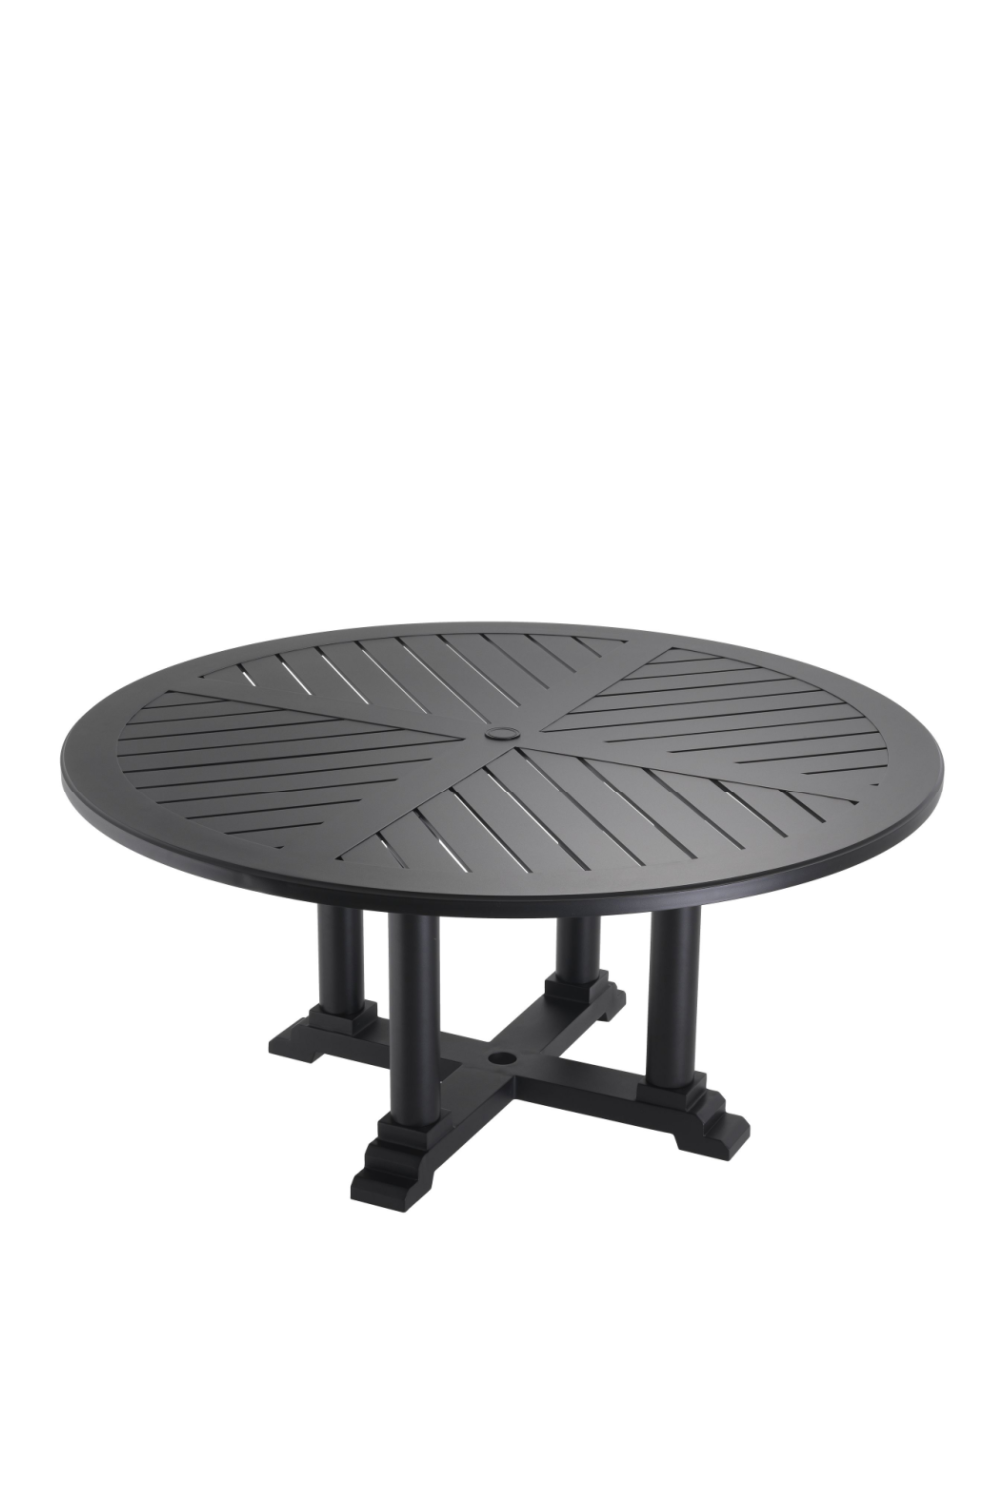 Black Round Outdoor Dining Table | Eichholtz Bell Rive | Oroa.com